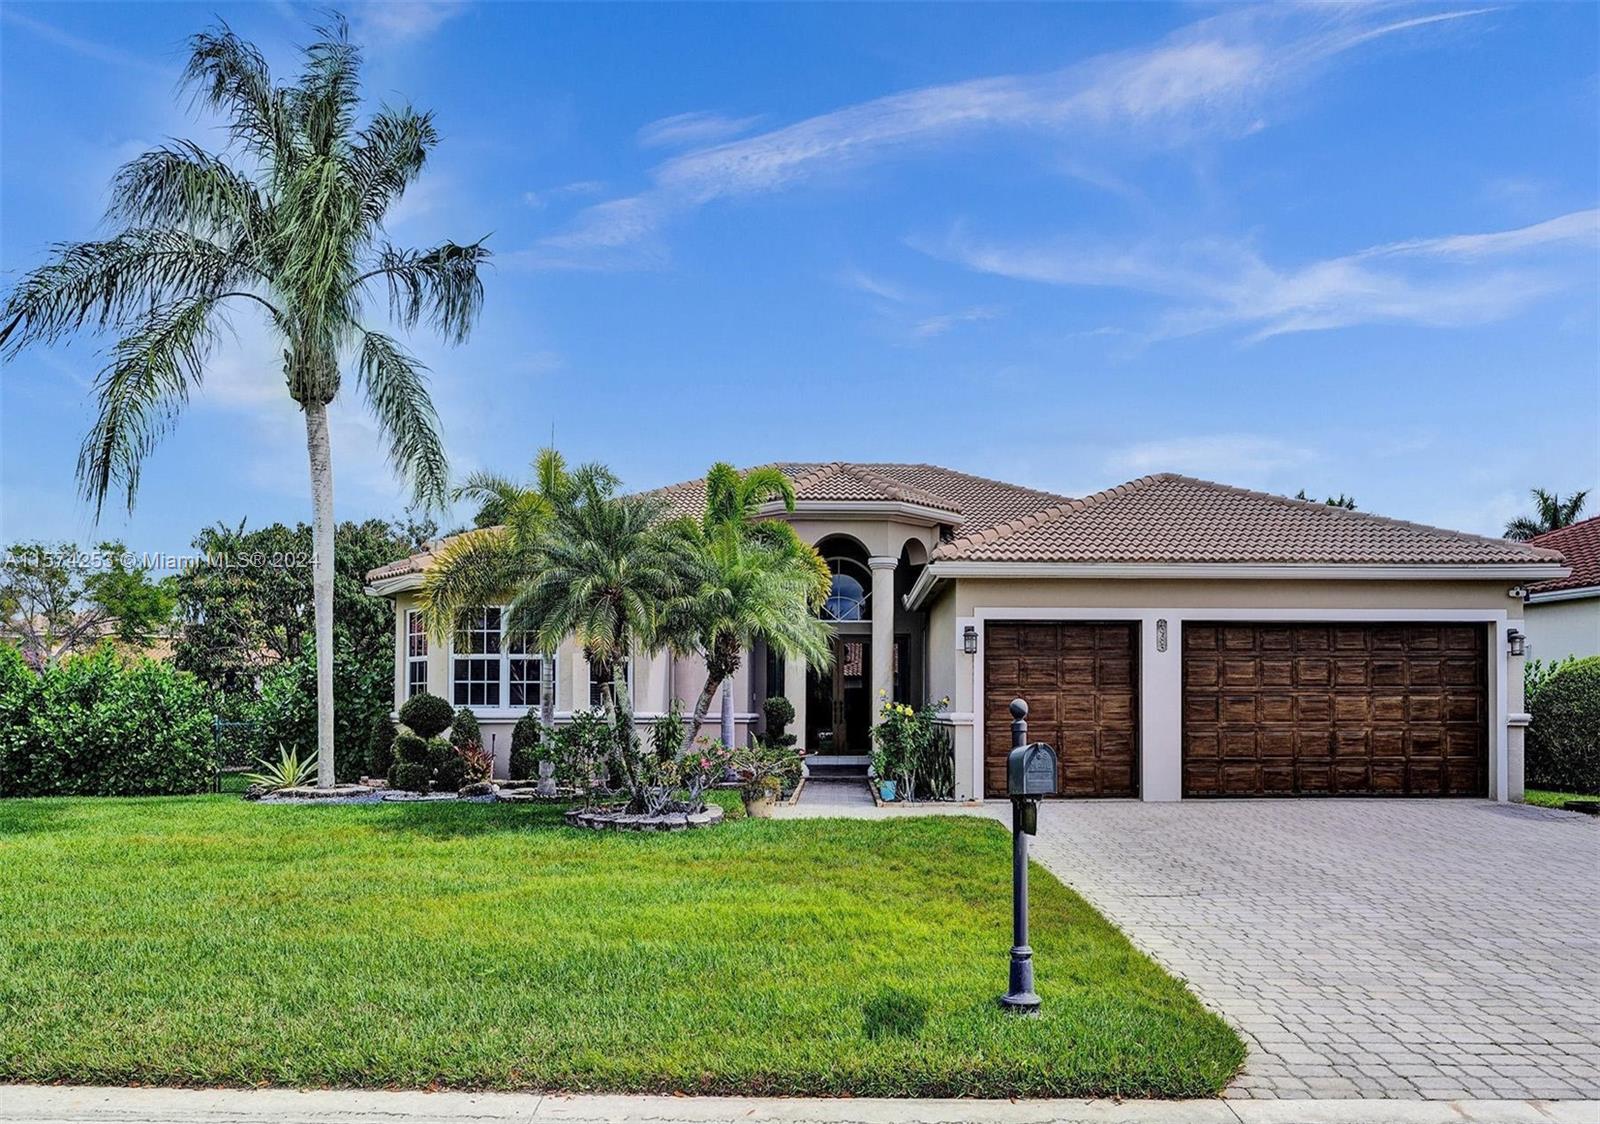 View Coral Springs, FL 33076 house